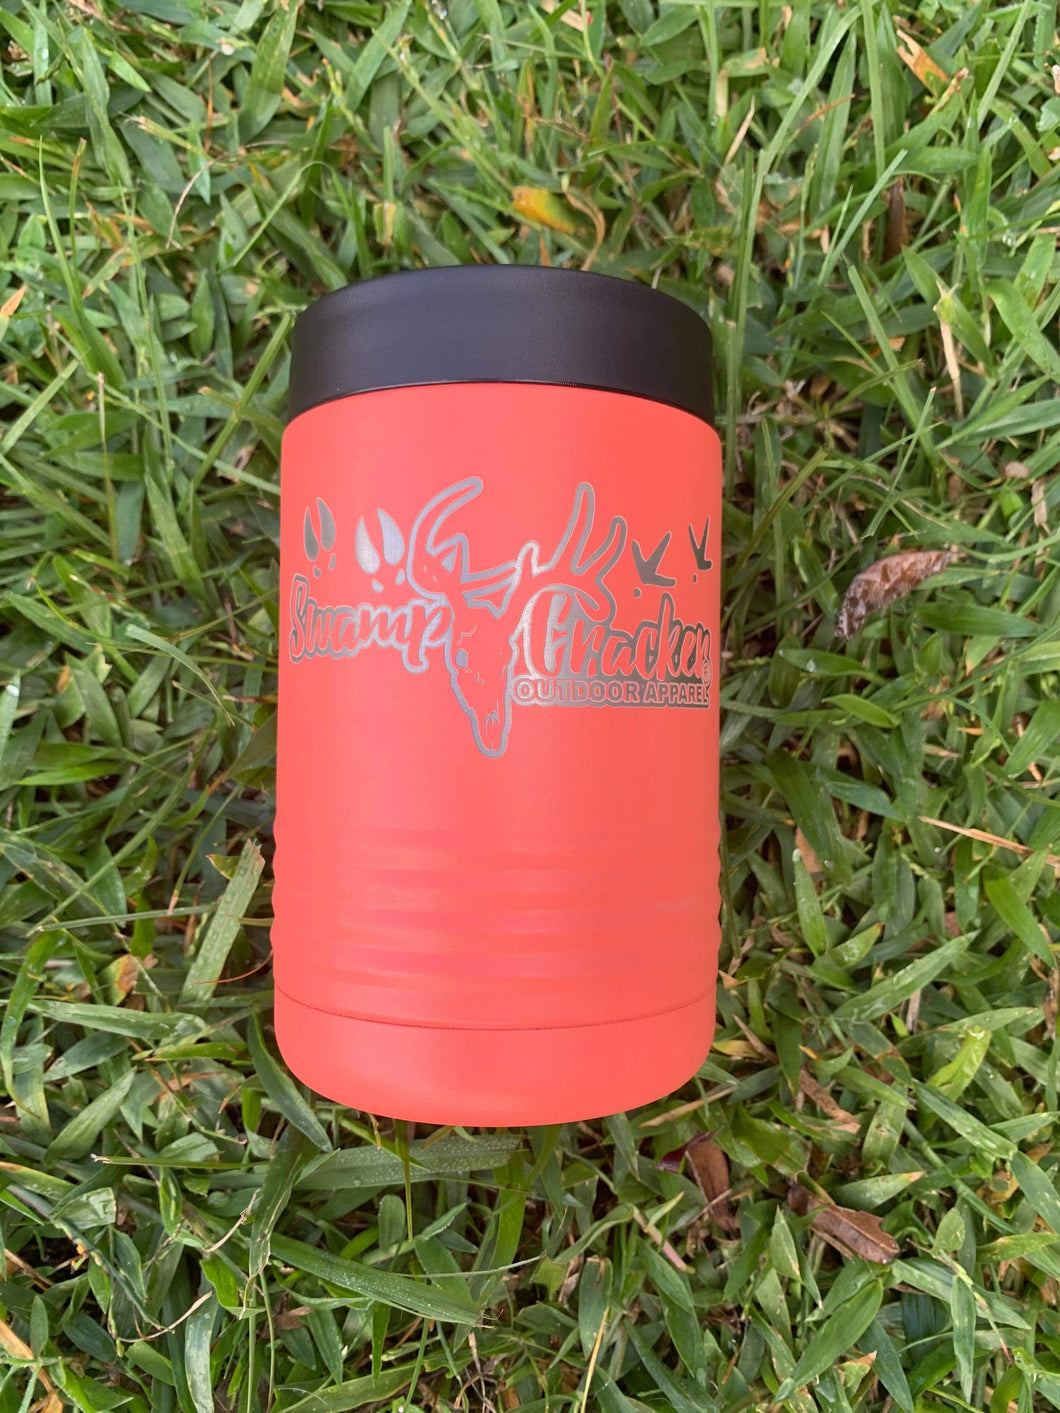 Coral Swamp Cracker Stainless Steel insulated Koozie